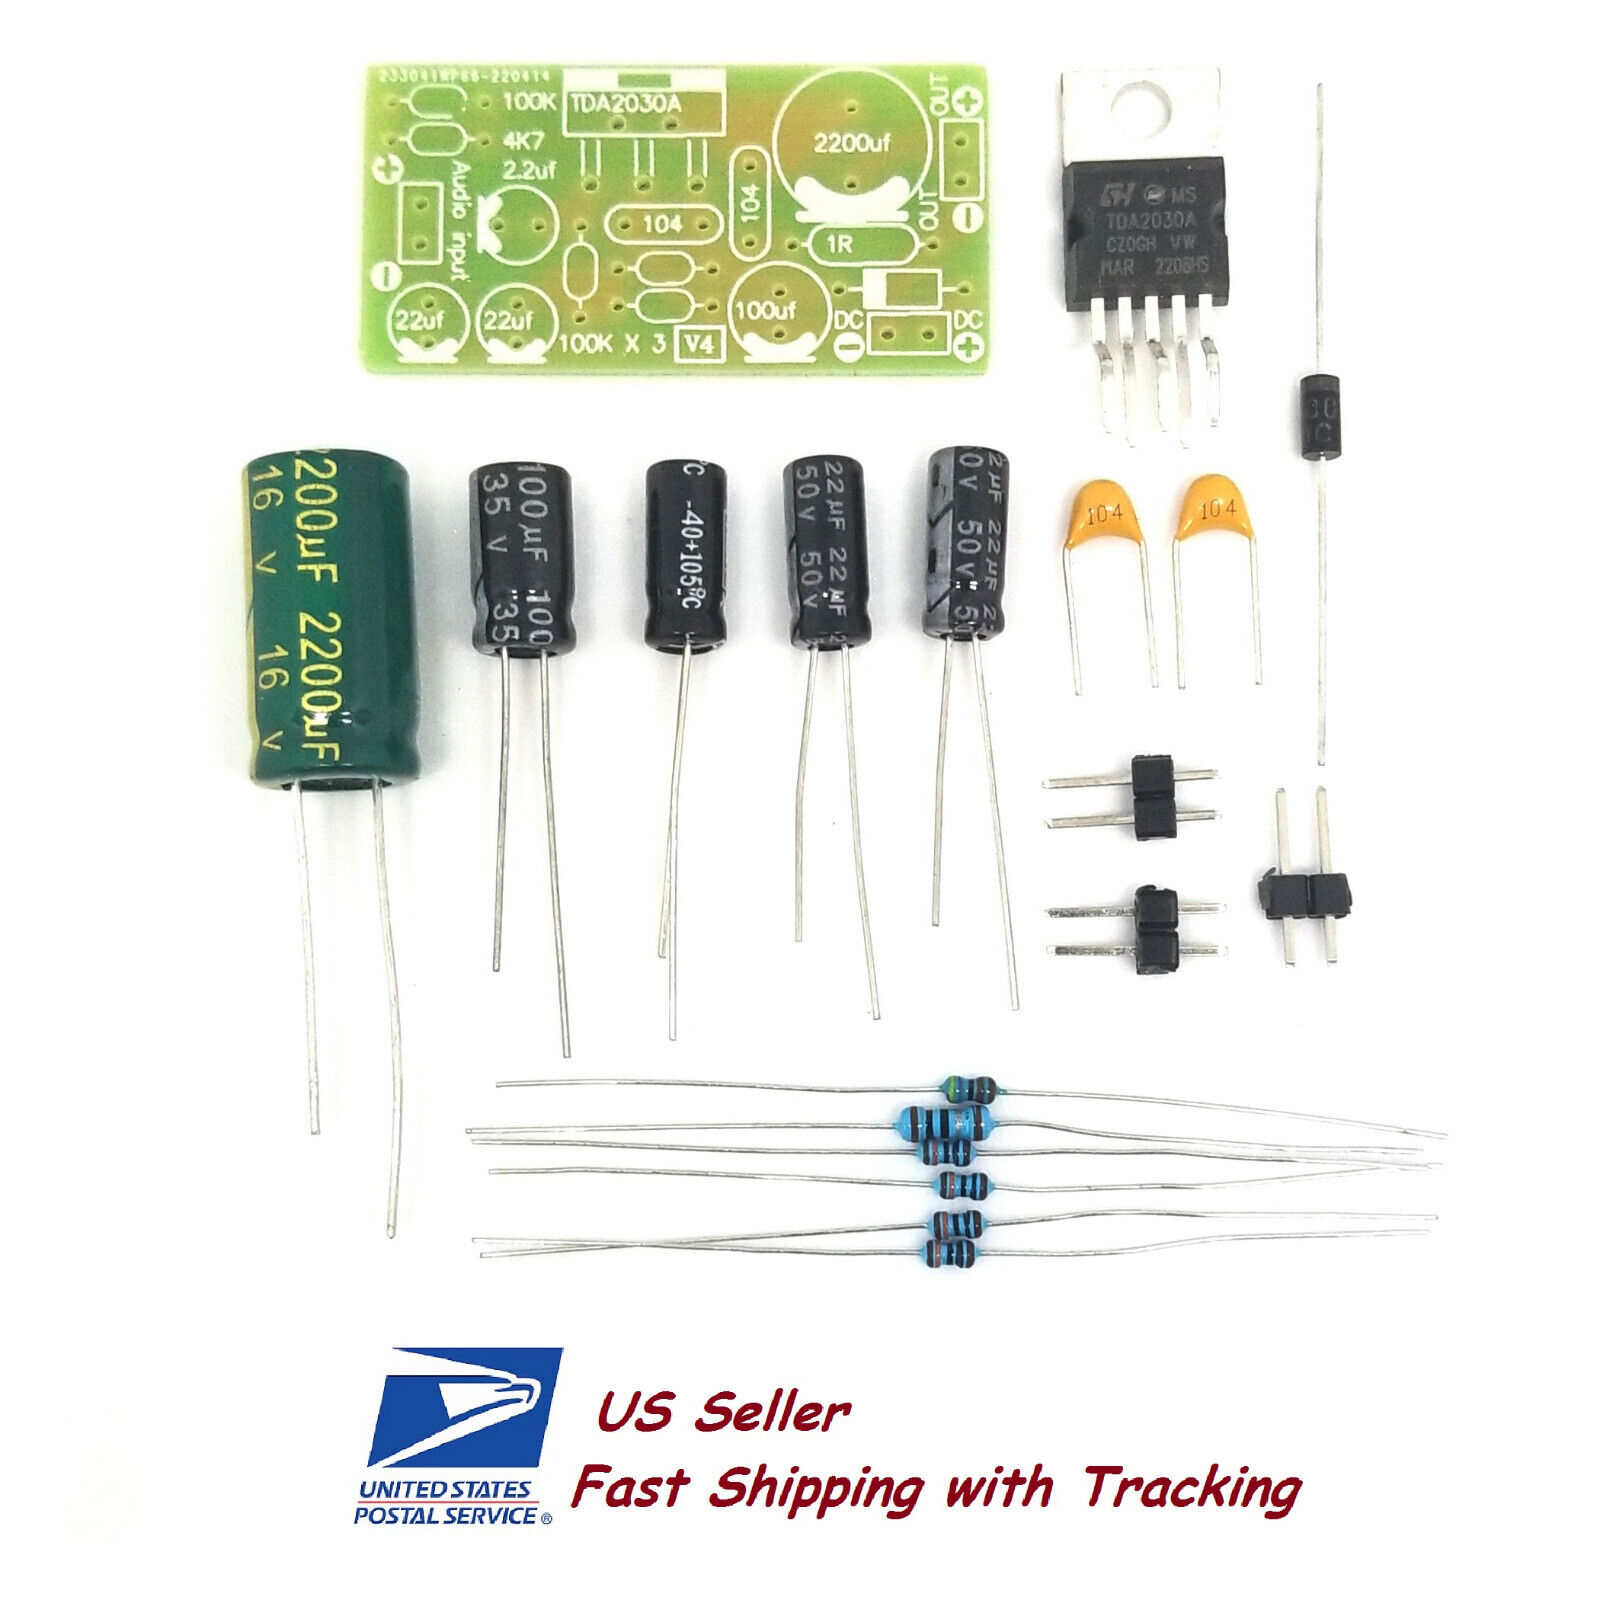 TDA2030A Electronic Mono Audio Power Amplifier DIY Kit - US Seller Fast Shipping